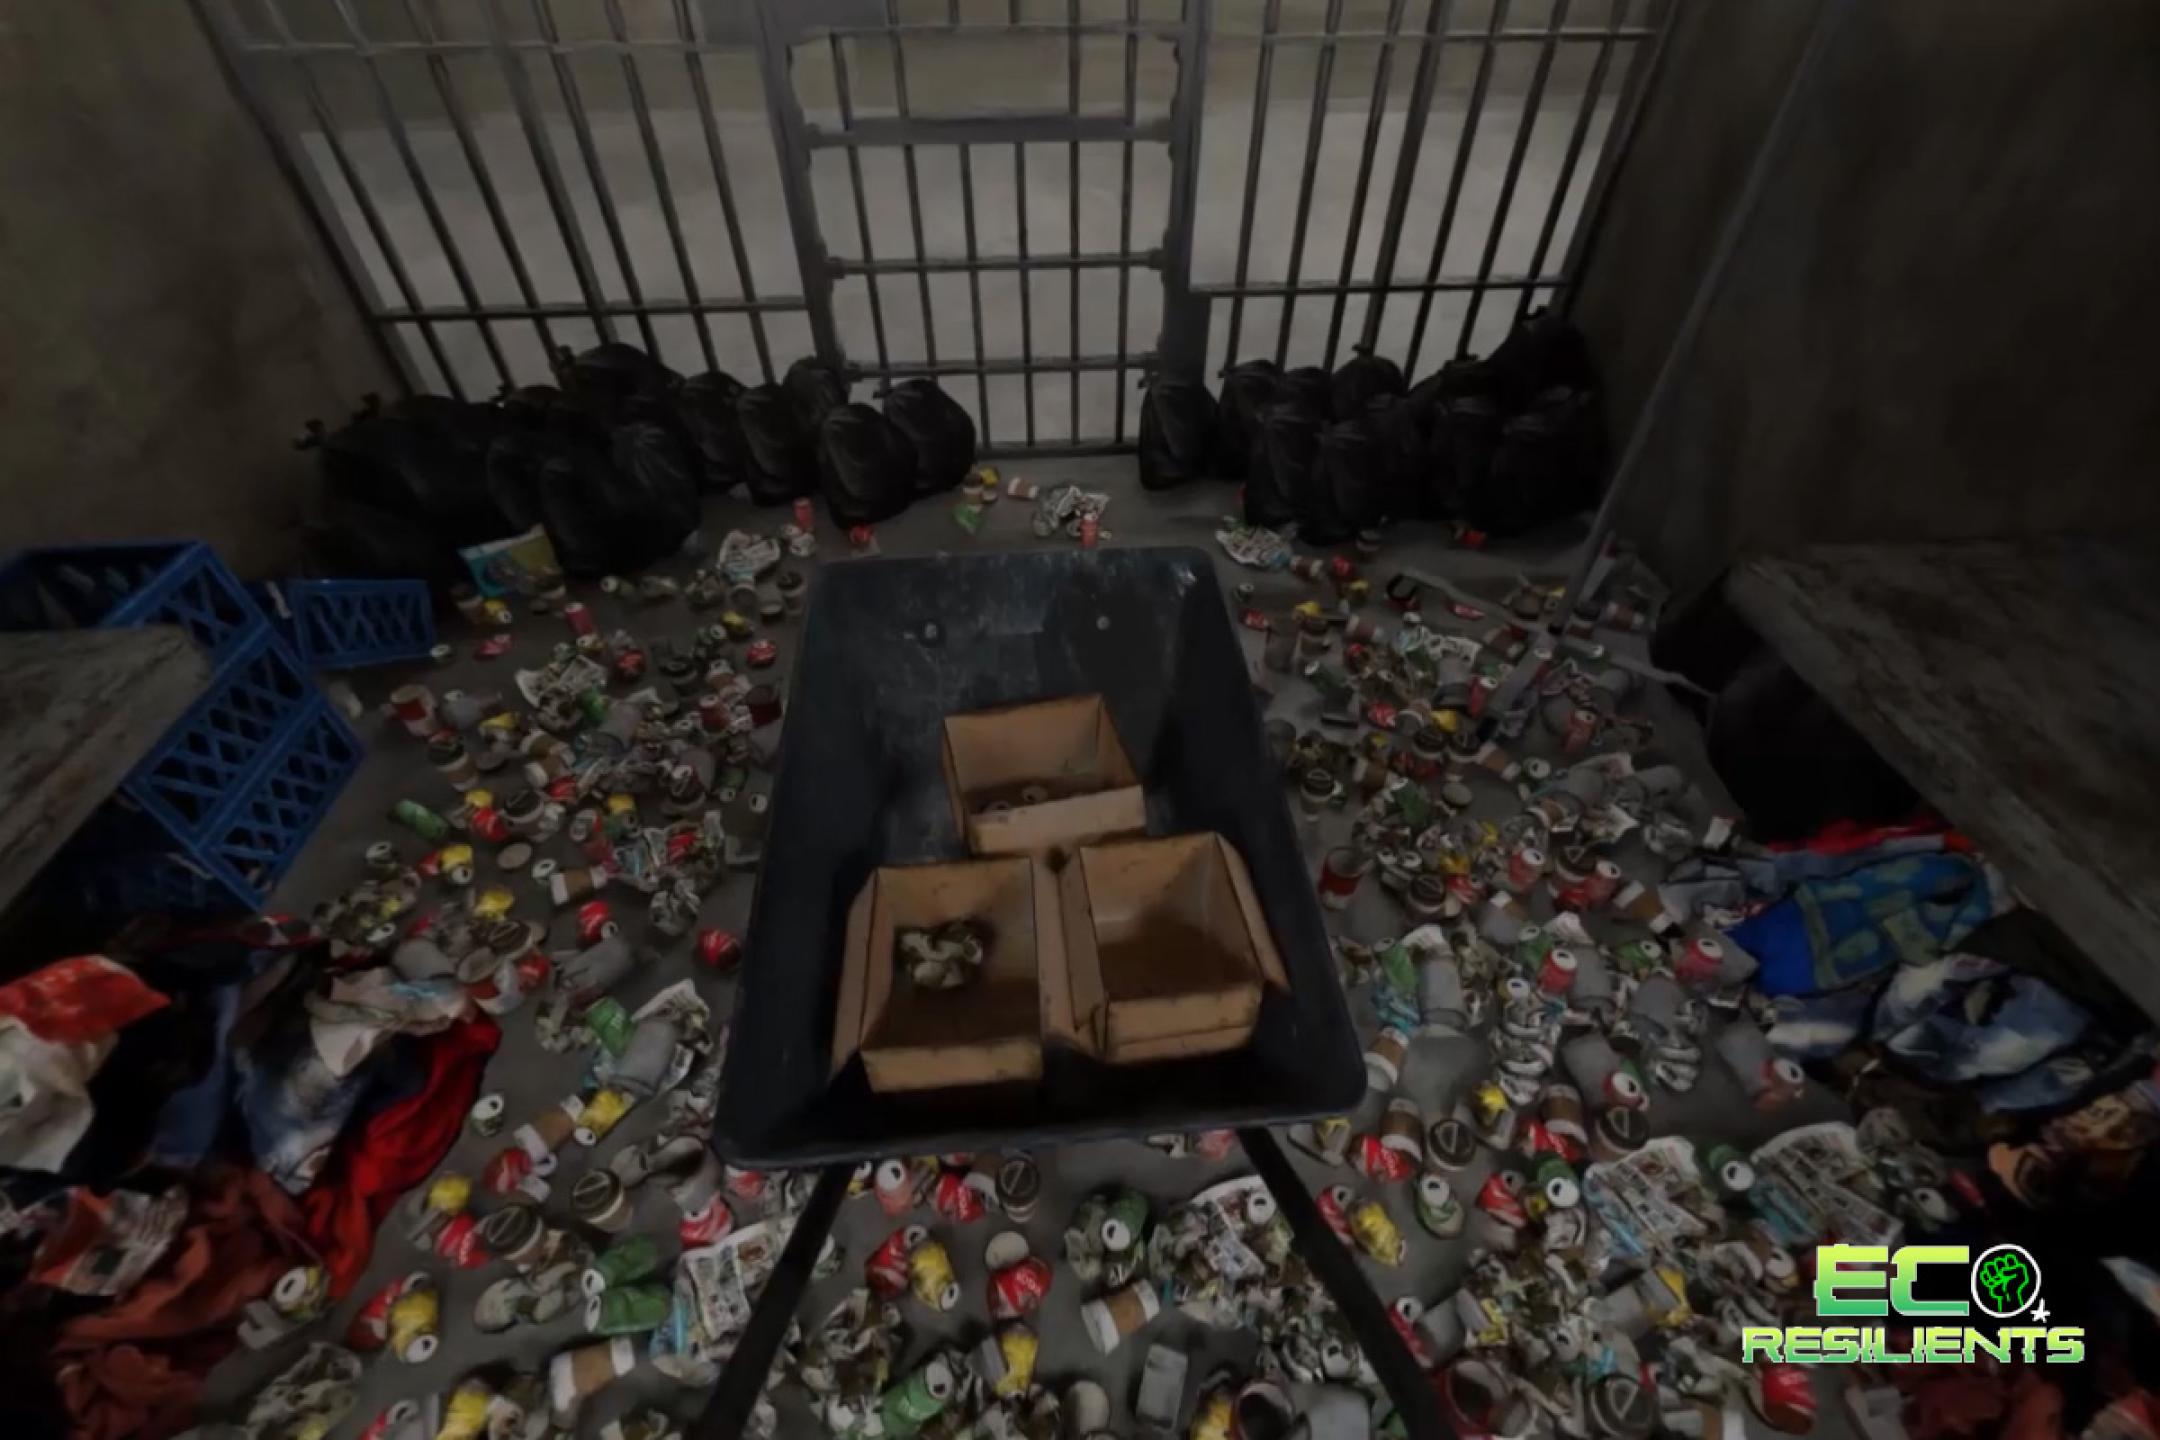 A prison cell where the floor is covered with cans and black garbage bags.